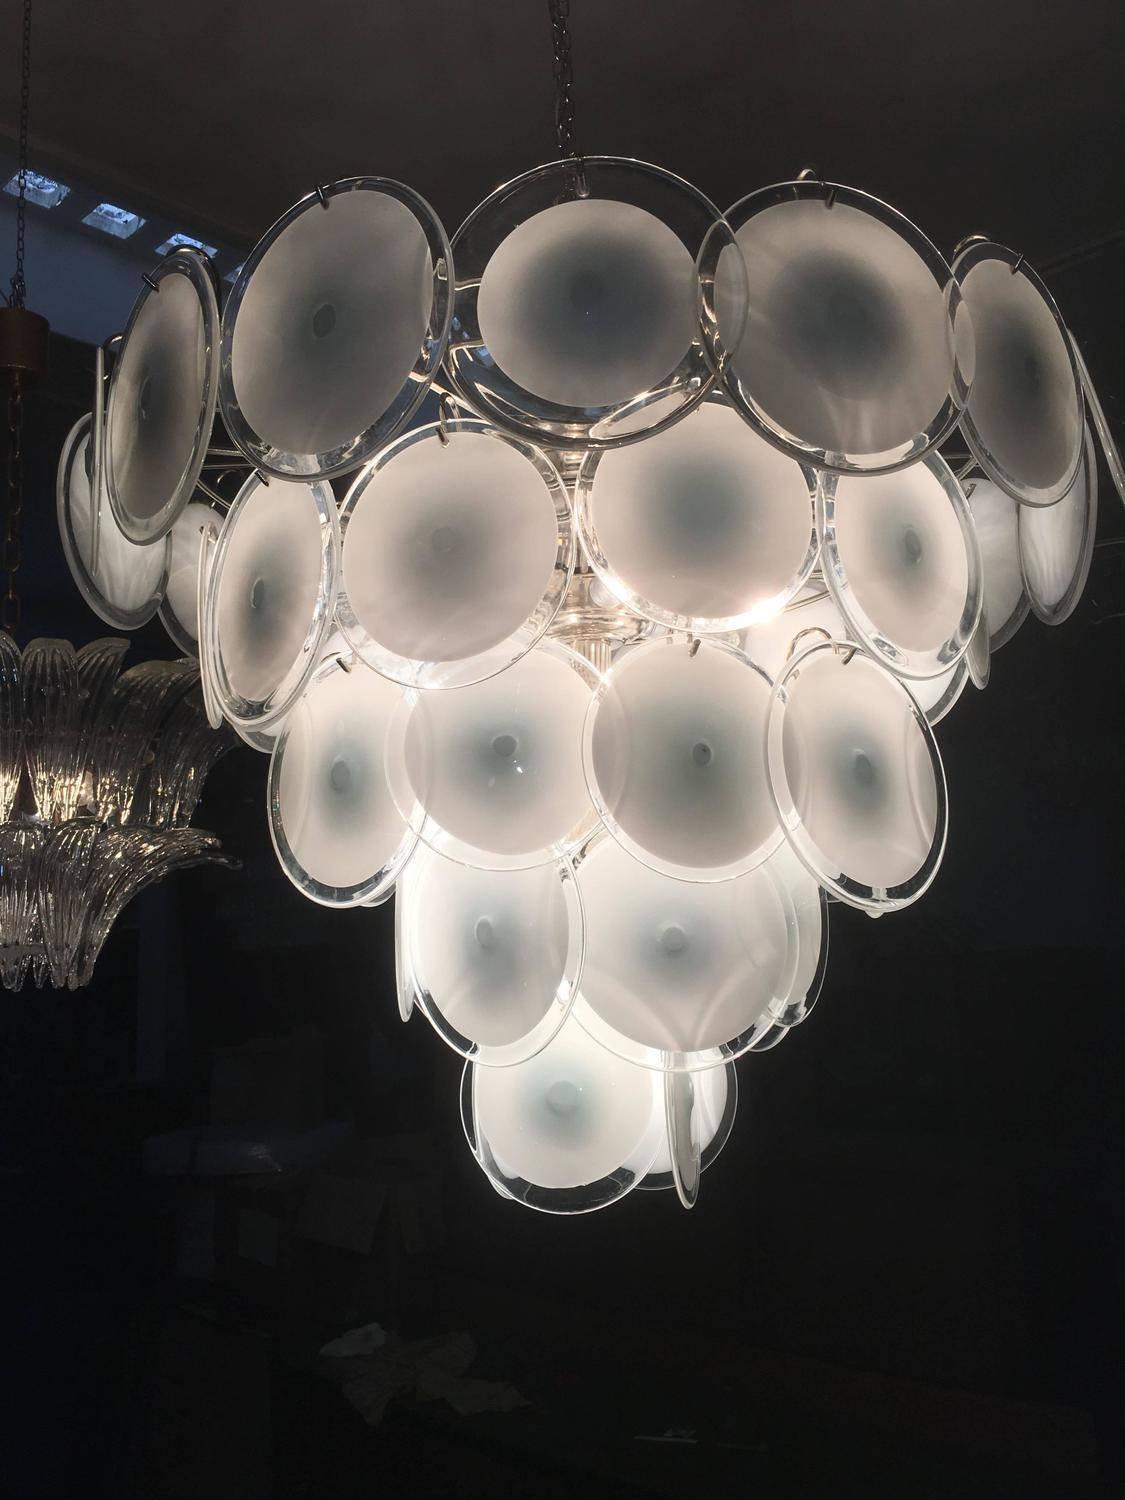 Italian Spectacular Pair of Murano Disc Chandeliers by Vistosi, 1970s For Sale